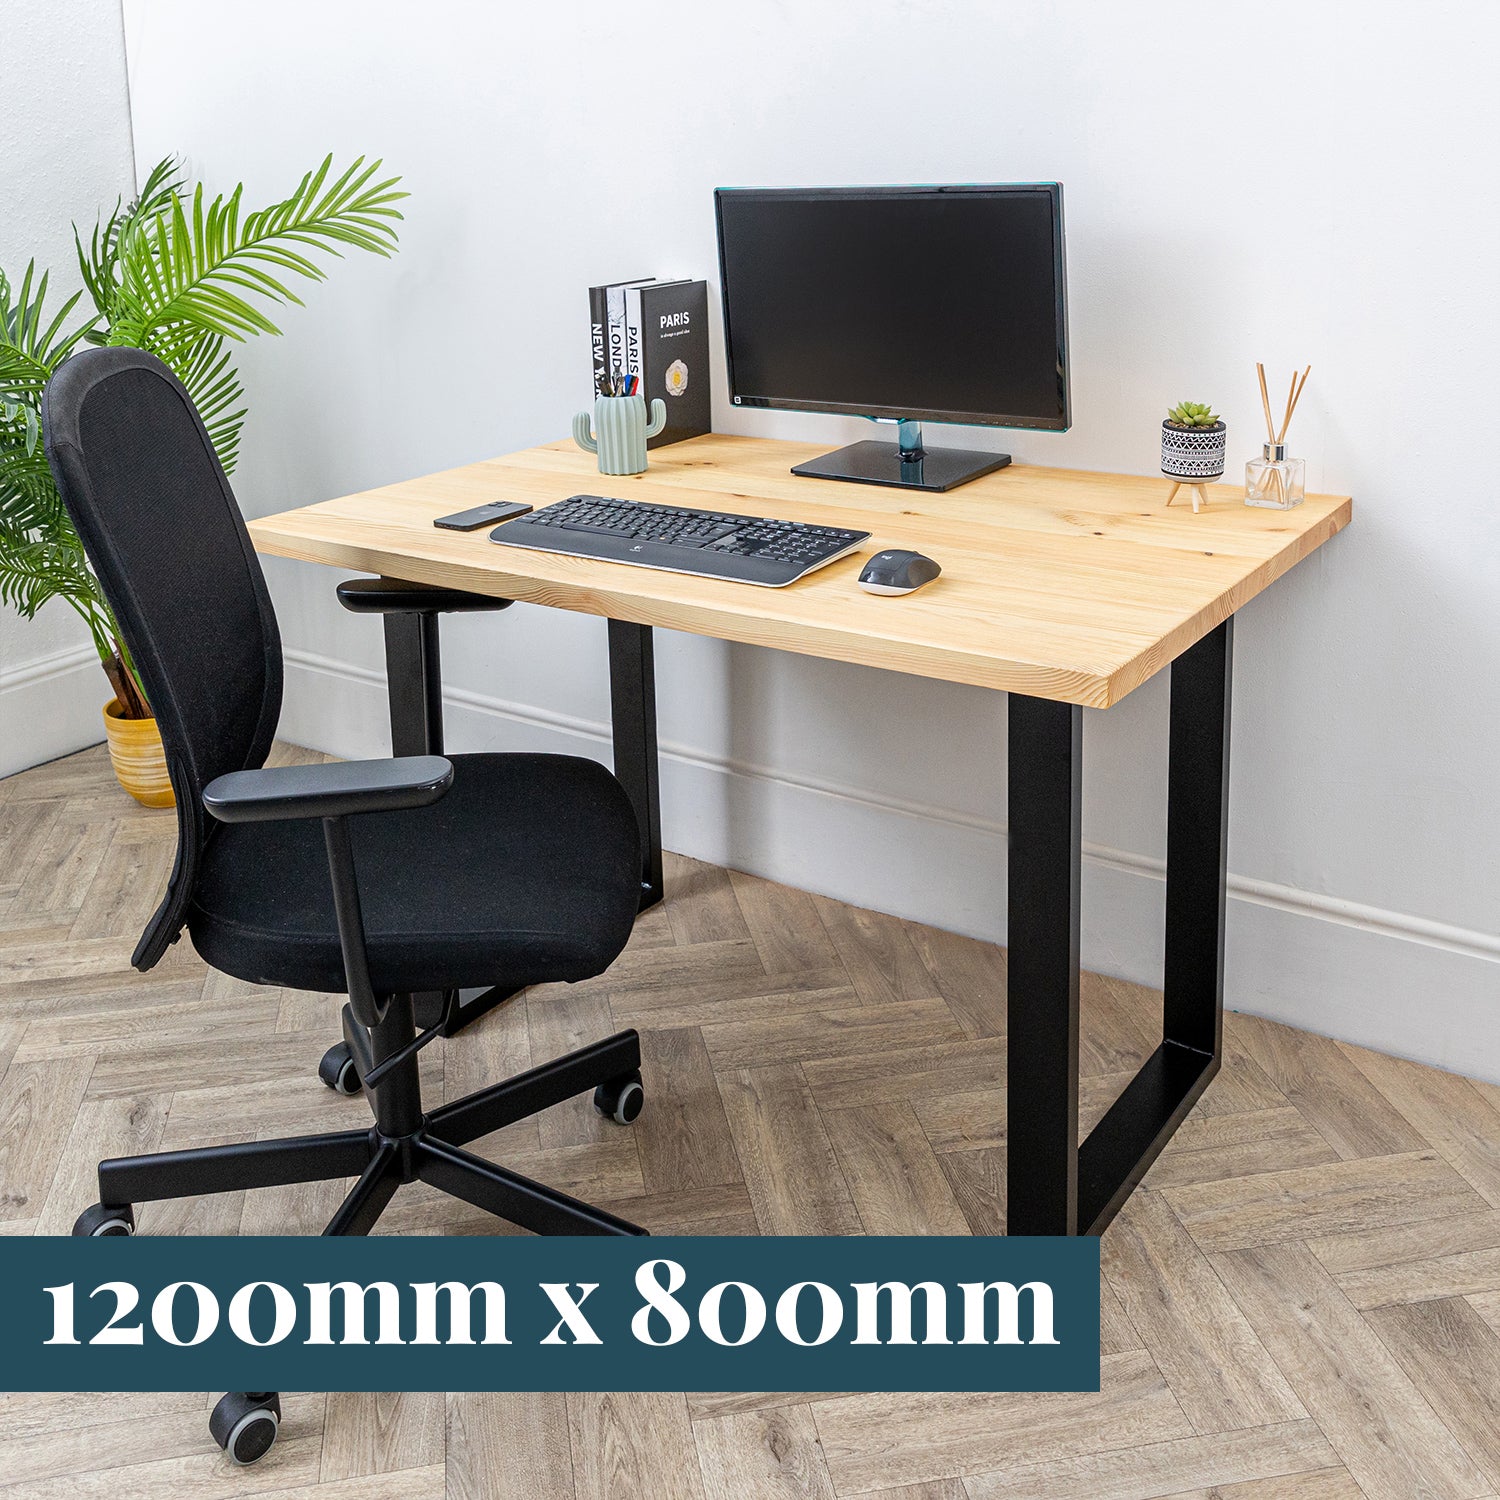 Pine Solid Wood Desk with Square Metal Legs #length_1200mm depth_800mm